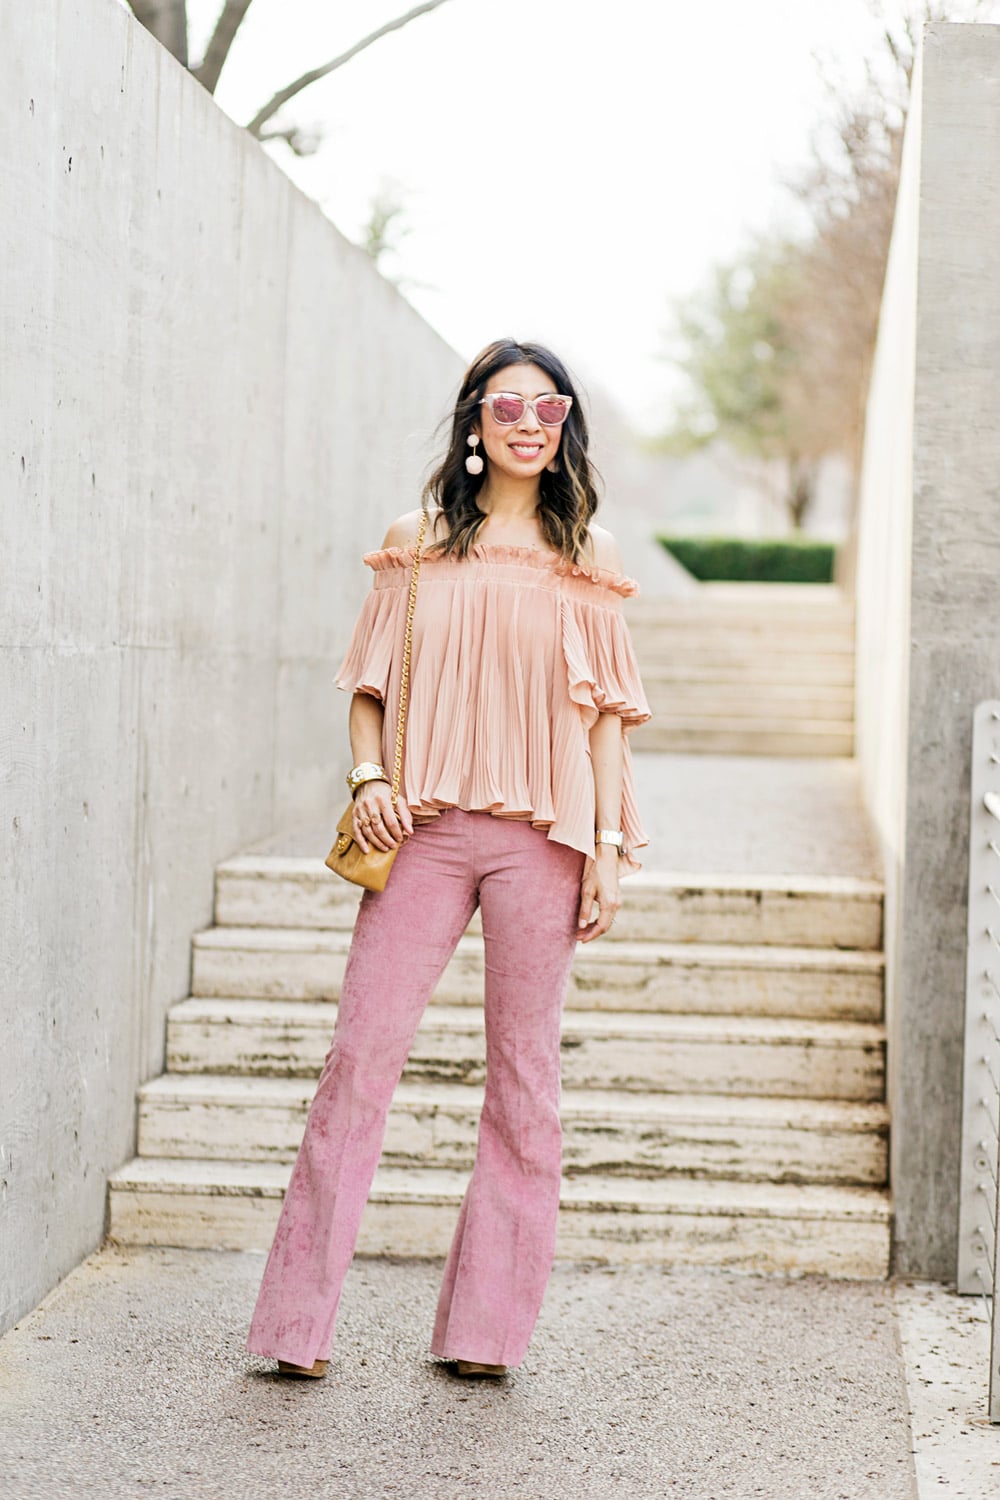 baublebar bahama pink pom pm earrings with endless rose pink pleated off the shoulder top and pink flare corduroy pants, chanel caviar mini flap, dior diorama pink mirrored sunglasses, spring outfit idea 